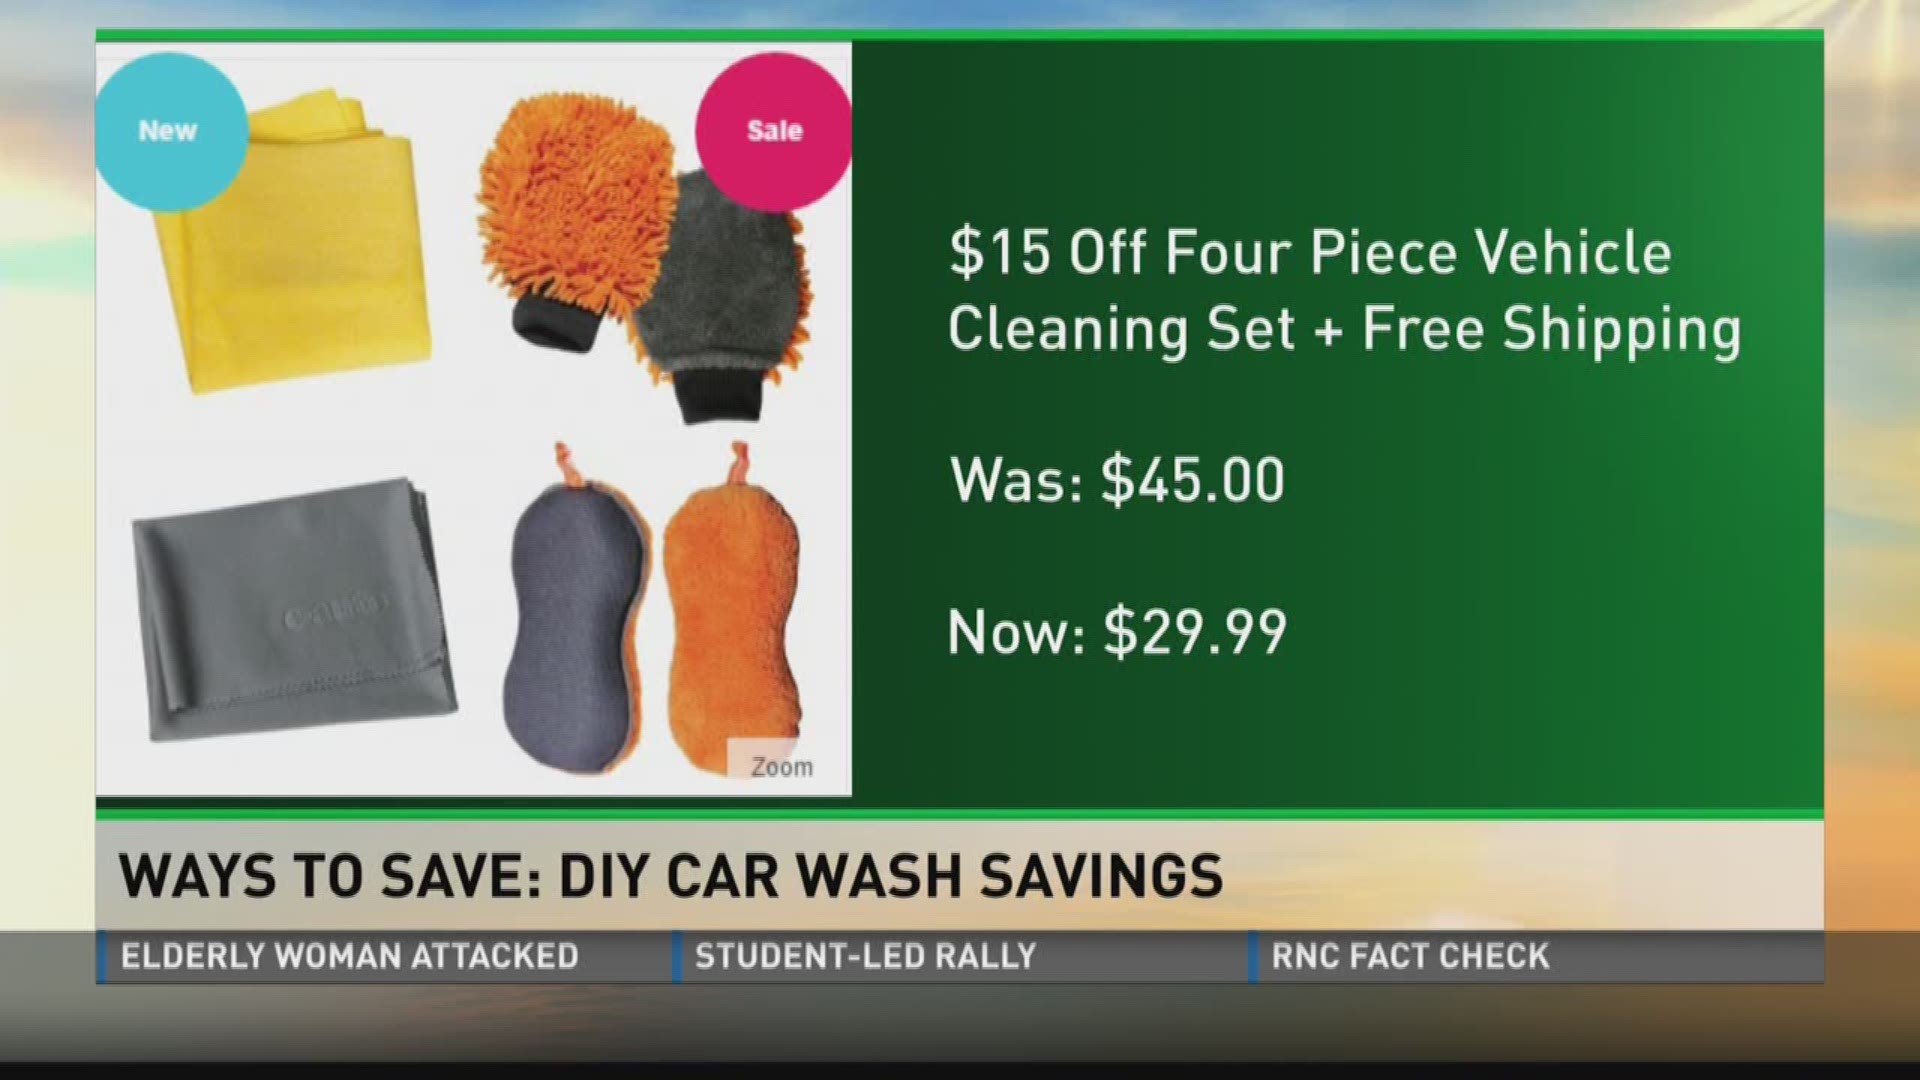 Money man Matt Granite shows how to save on a DIY car wash cleaning set.